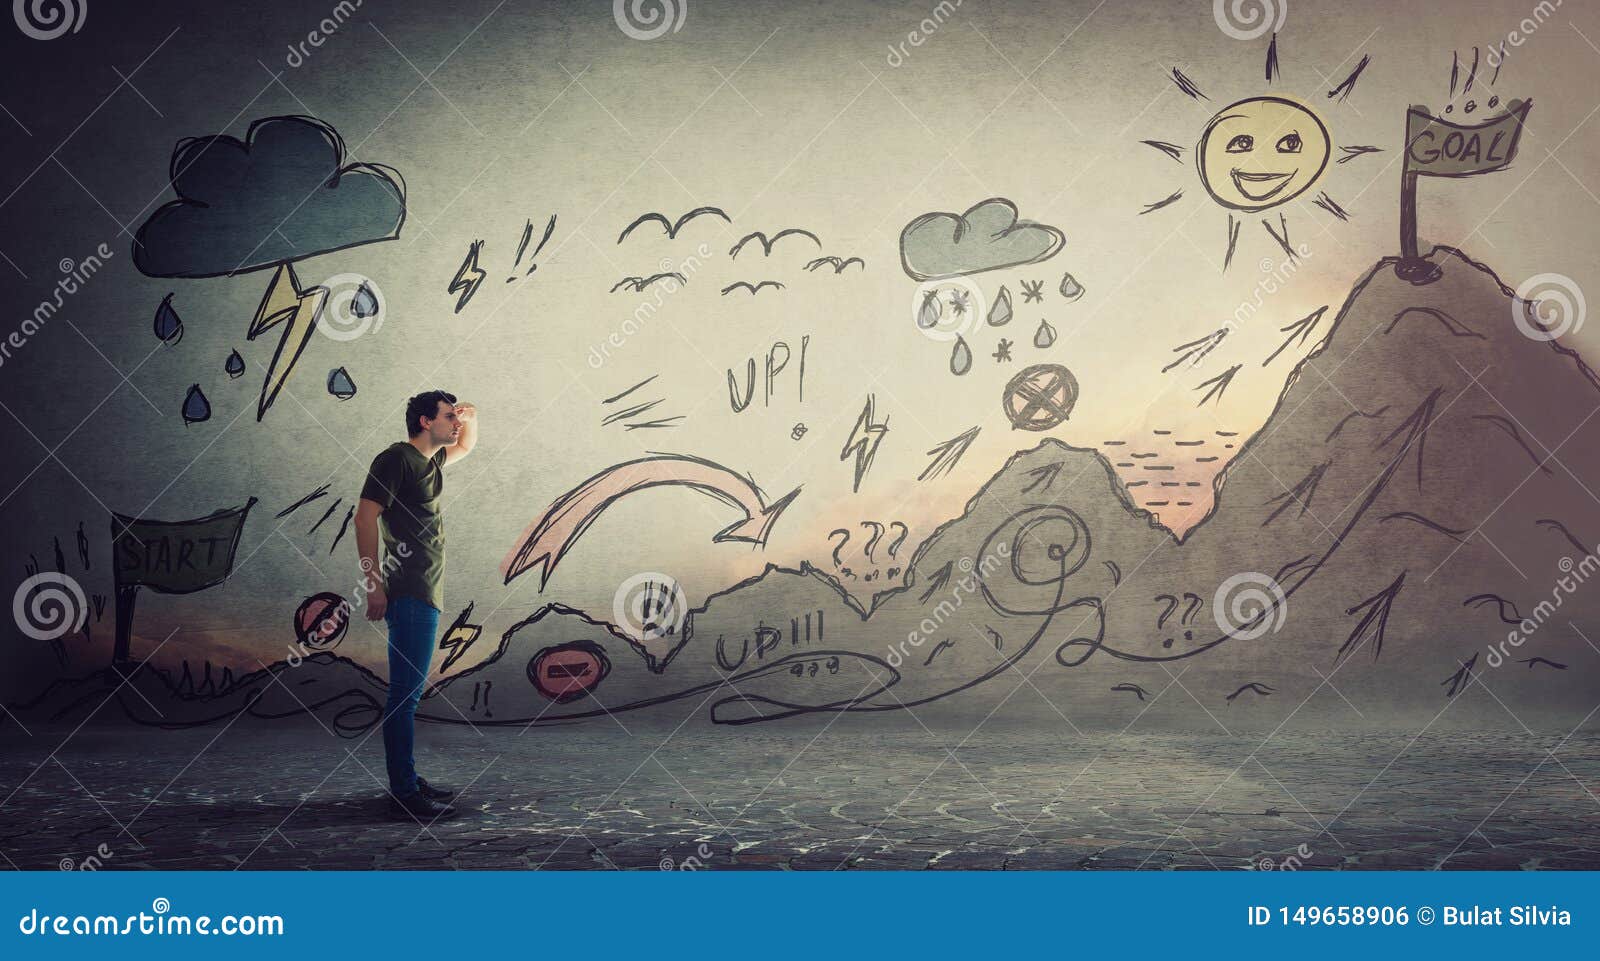 confident guy starting a life quest with obstacles drawn on wall. self overcome imaginary mountain, climbing ups and downs for